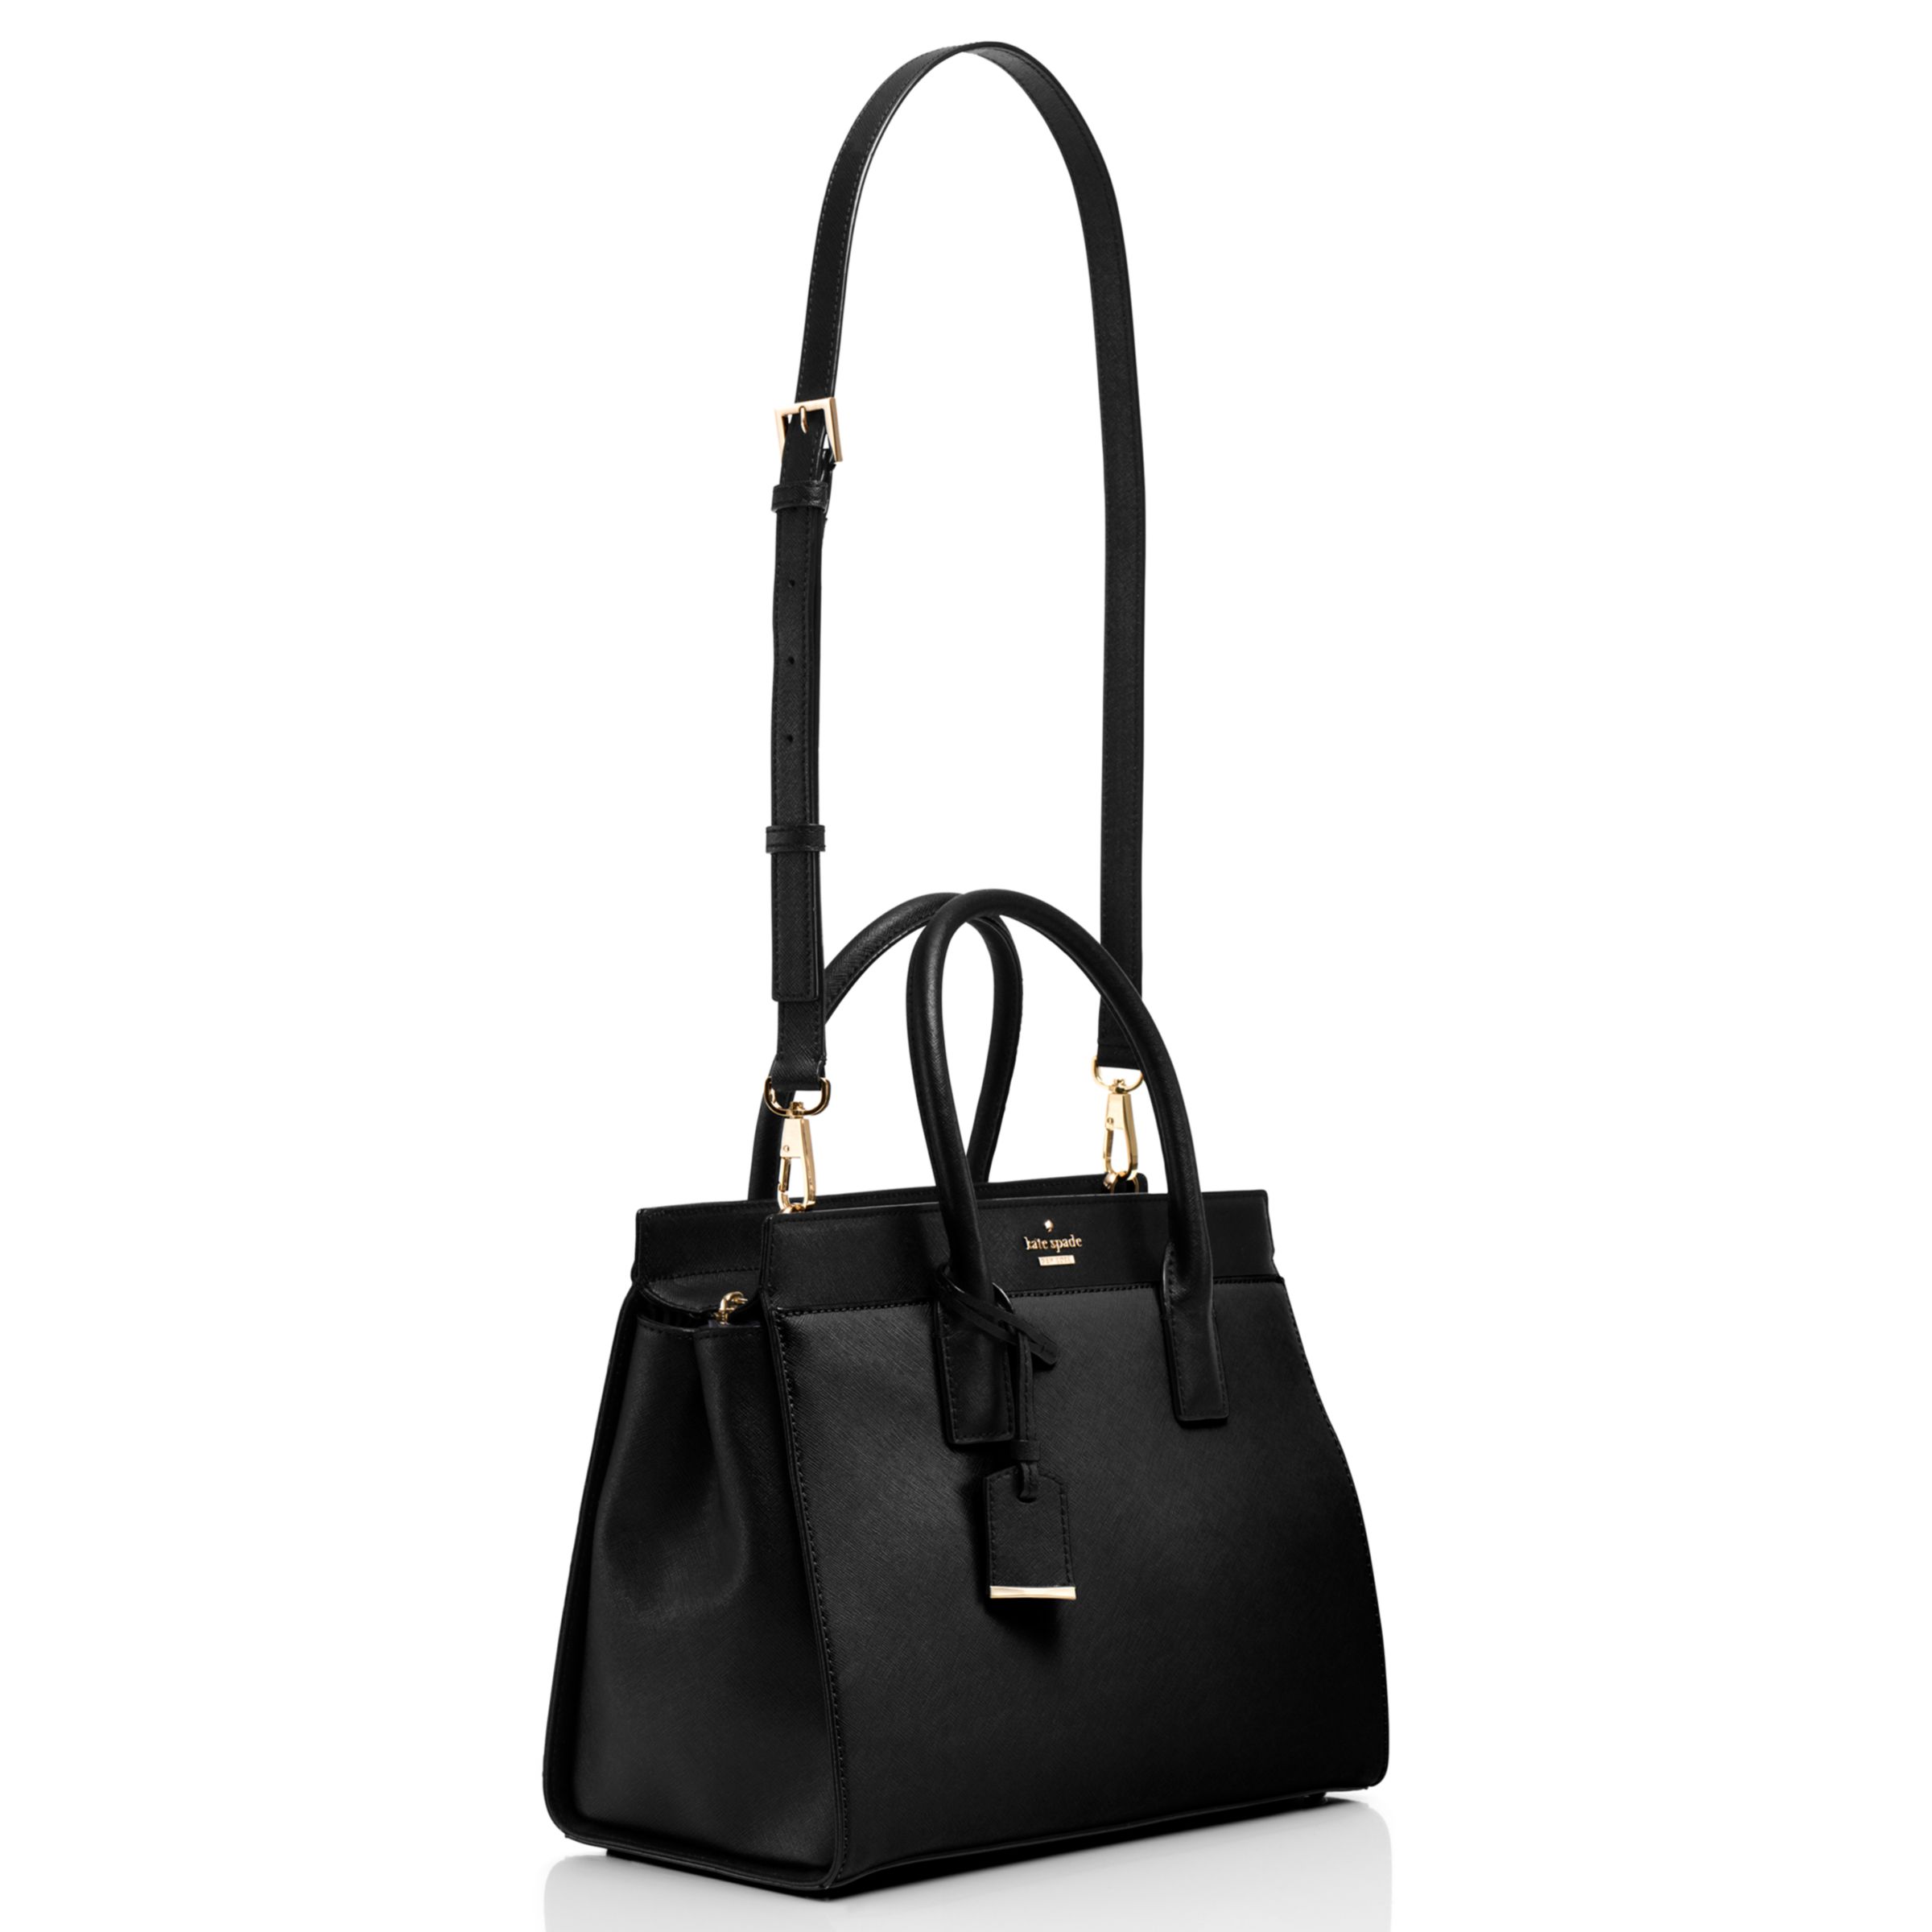 kate spade new york Cameron Street Candace Leather Satchel